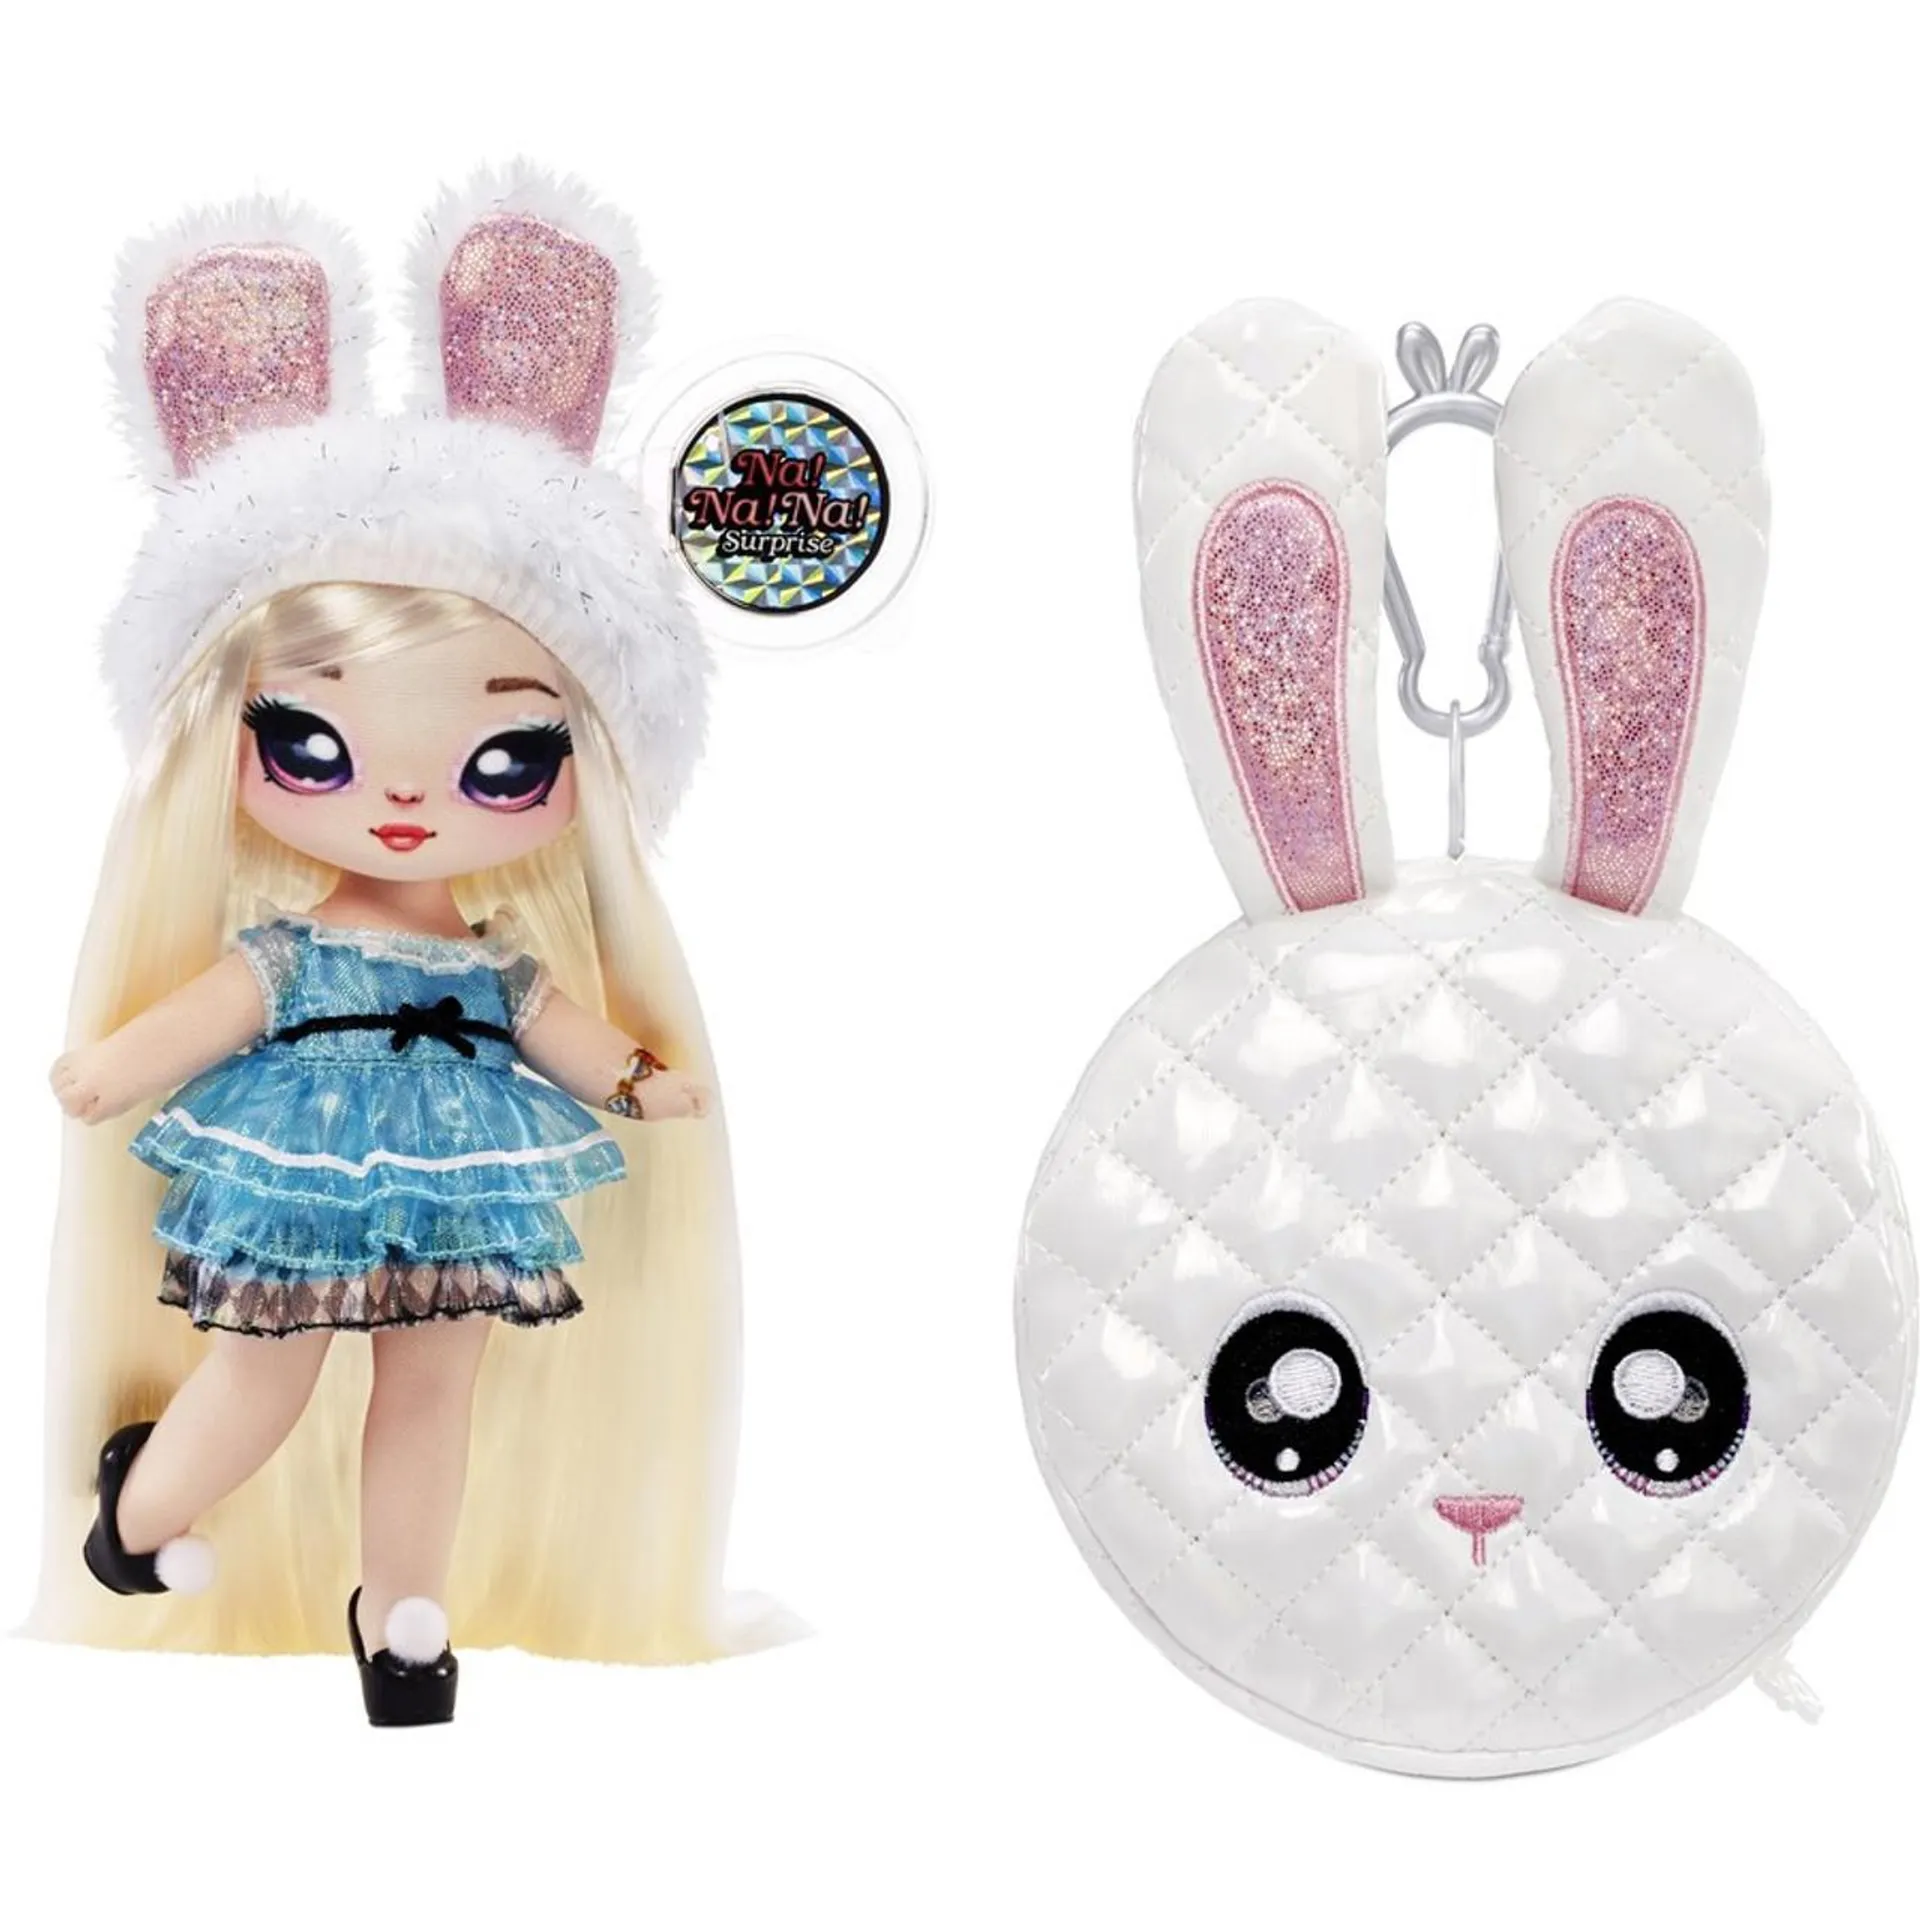 Na! Na! Na! Surprise 2-in-1 Soft Fashion Doll and Metallic Purse Glam Series